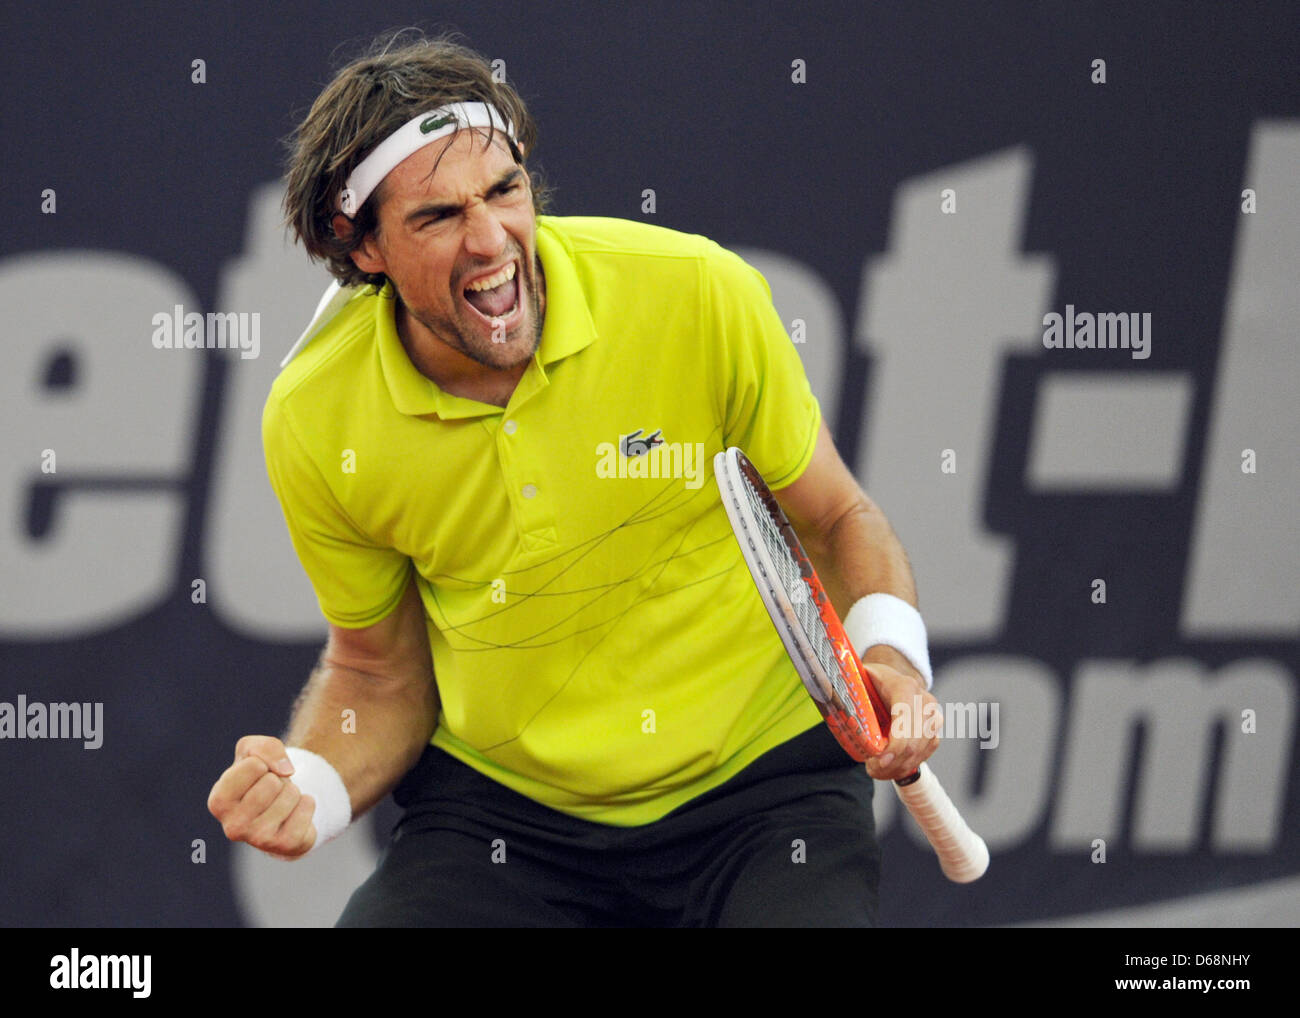 French tennis player Jeremy Chardy celebrates a point during the match  against German player Reister at